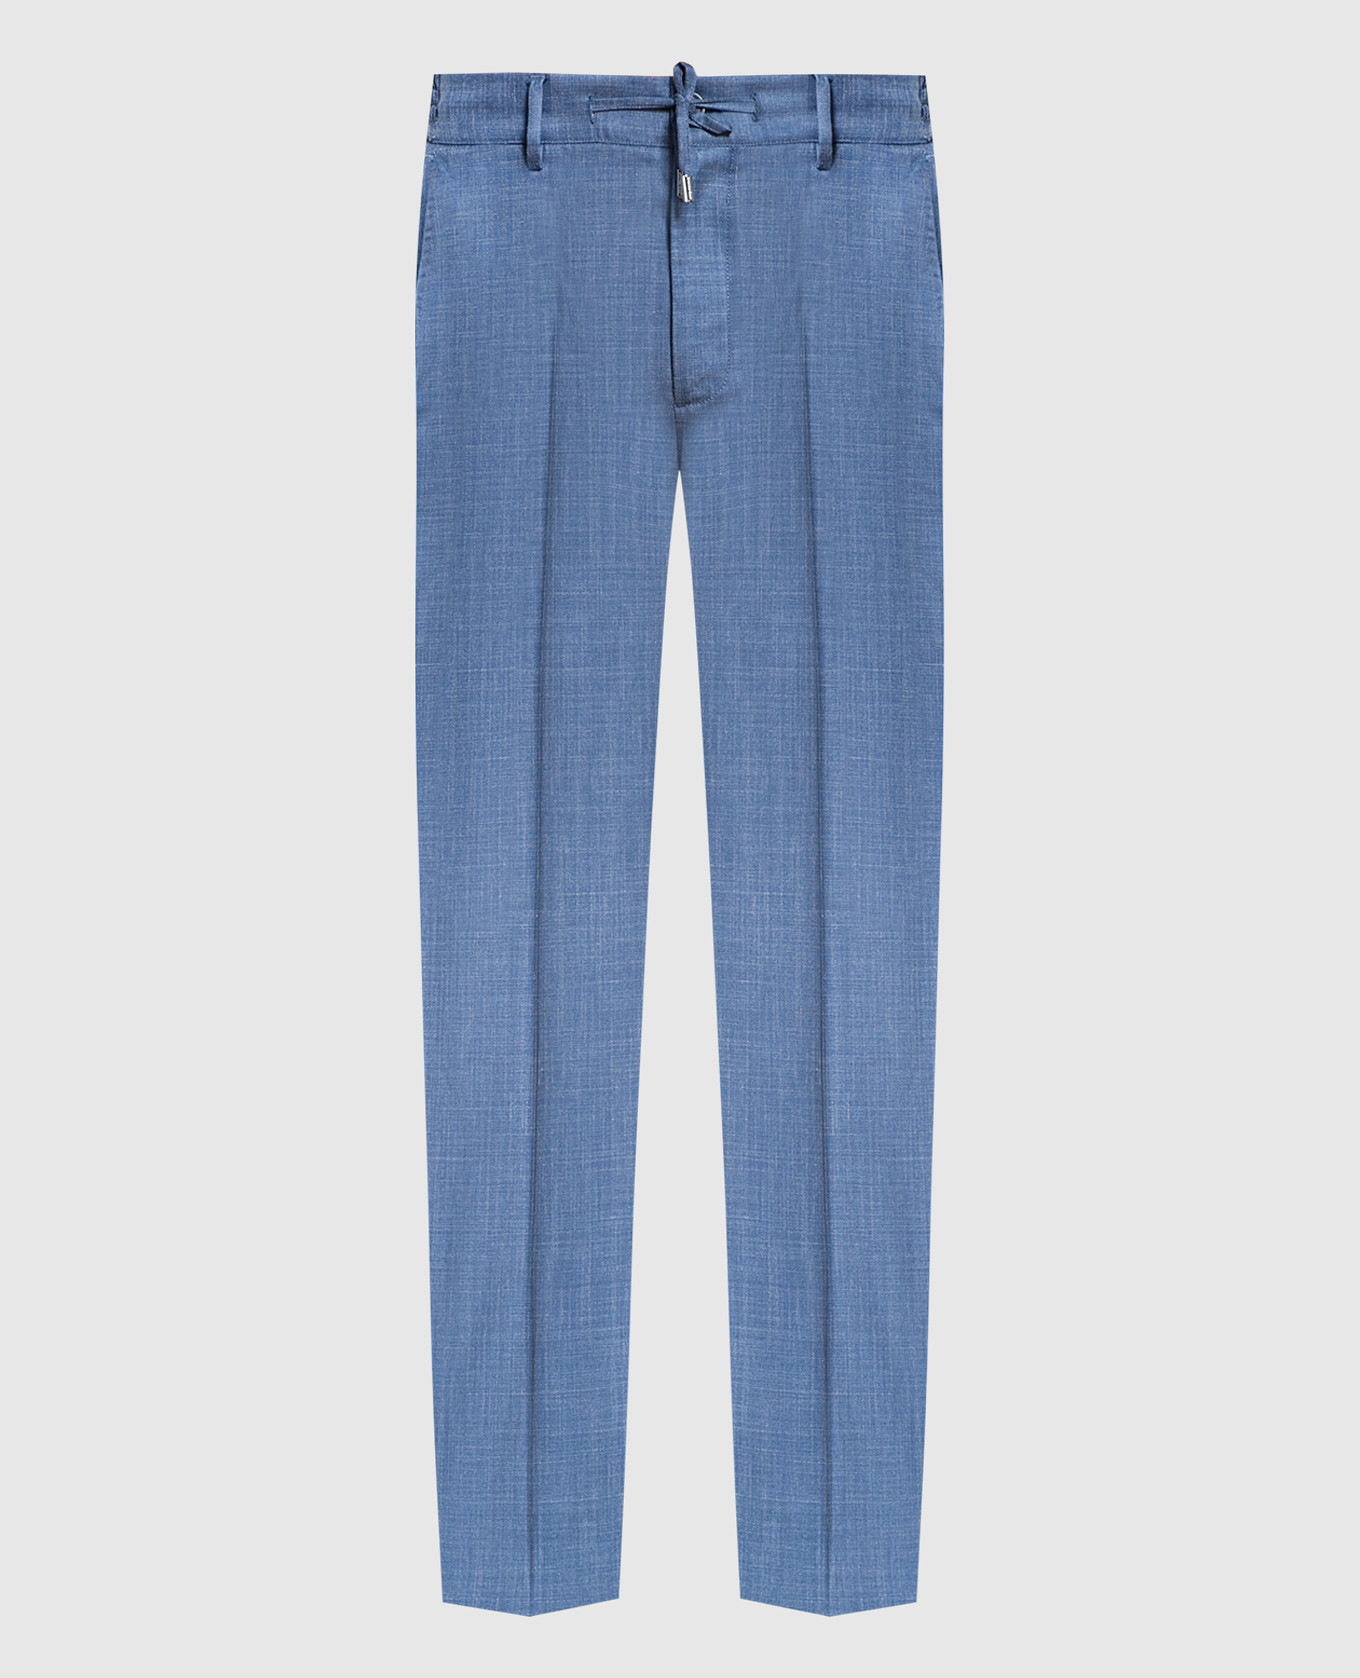 Blue trousers made of wool, silk and linen